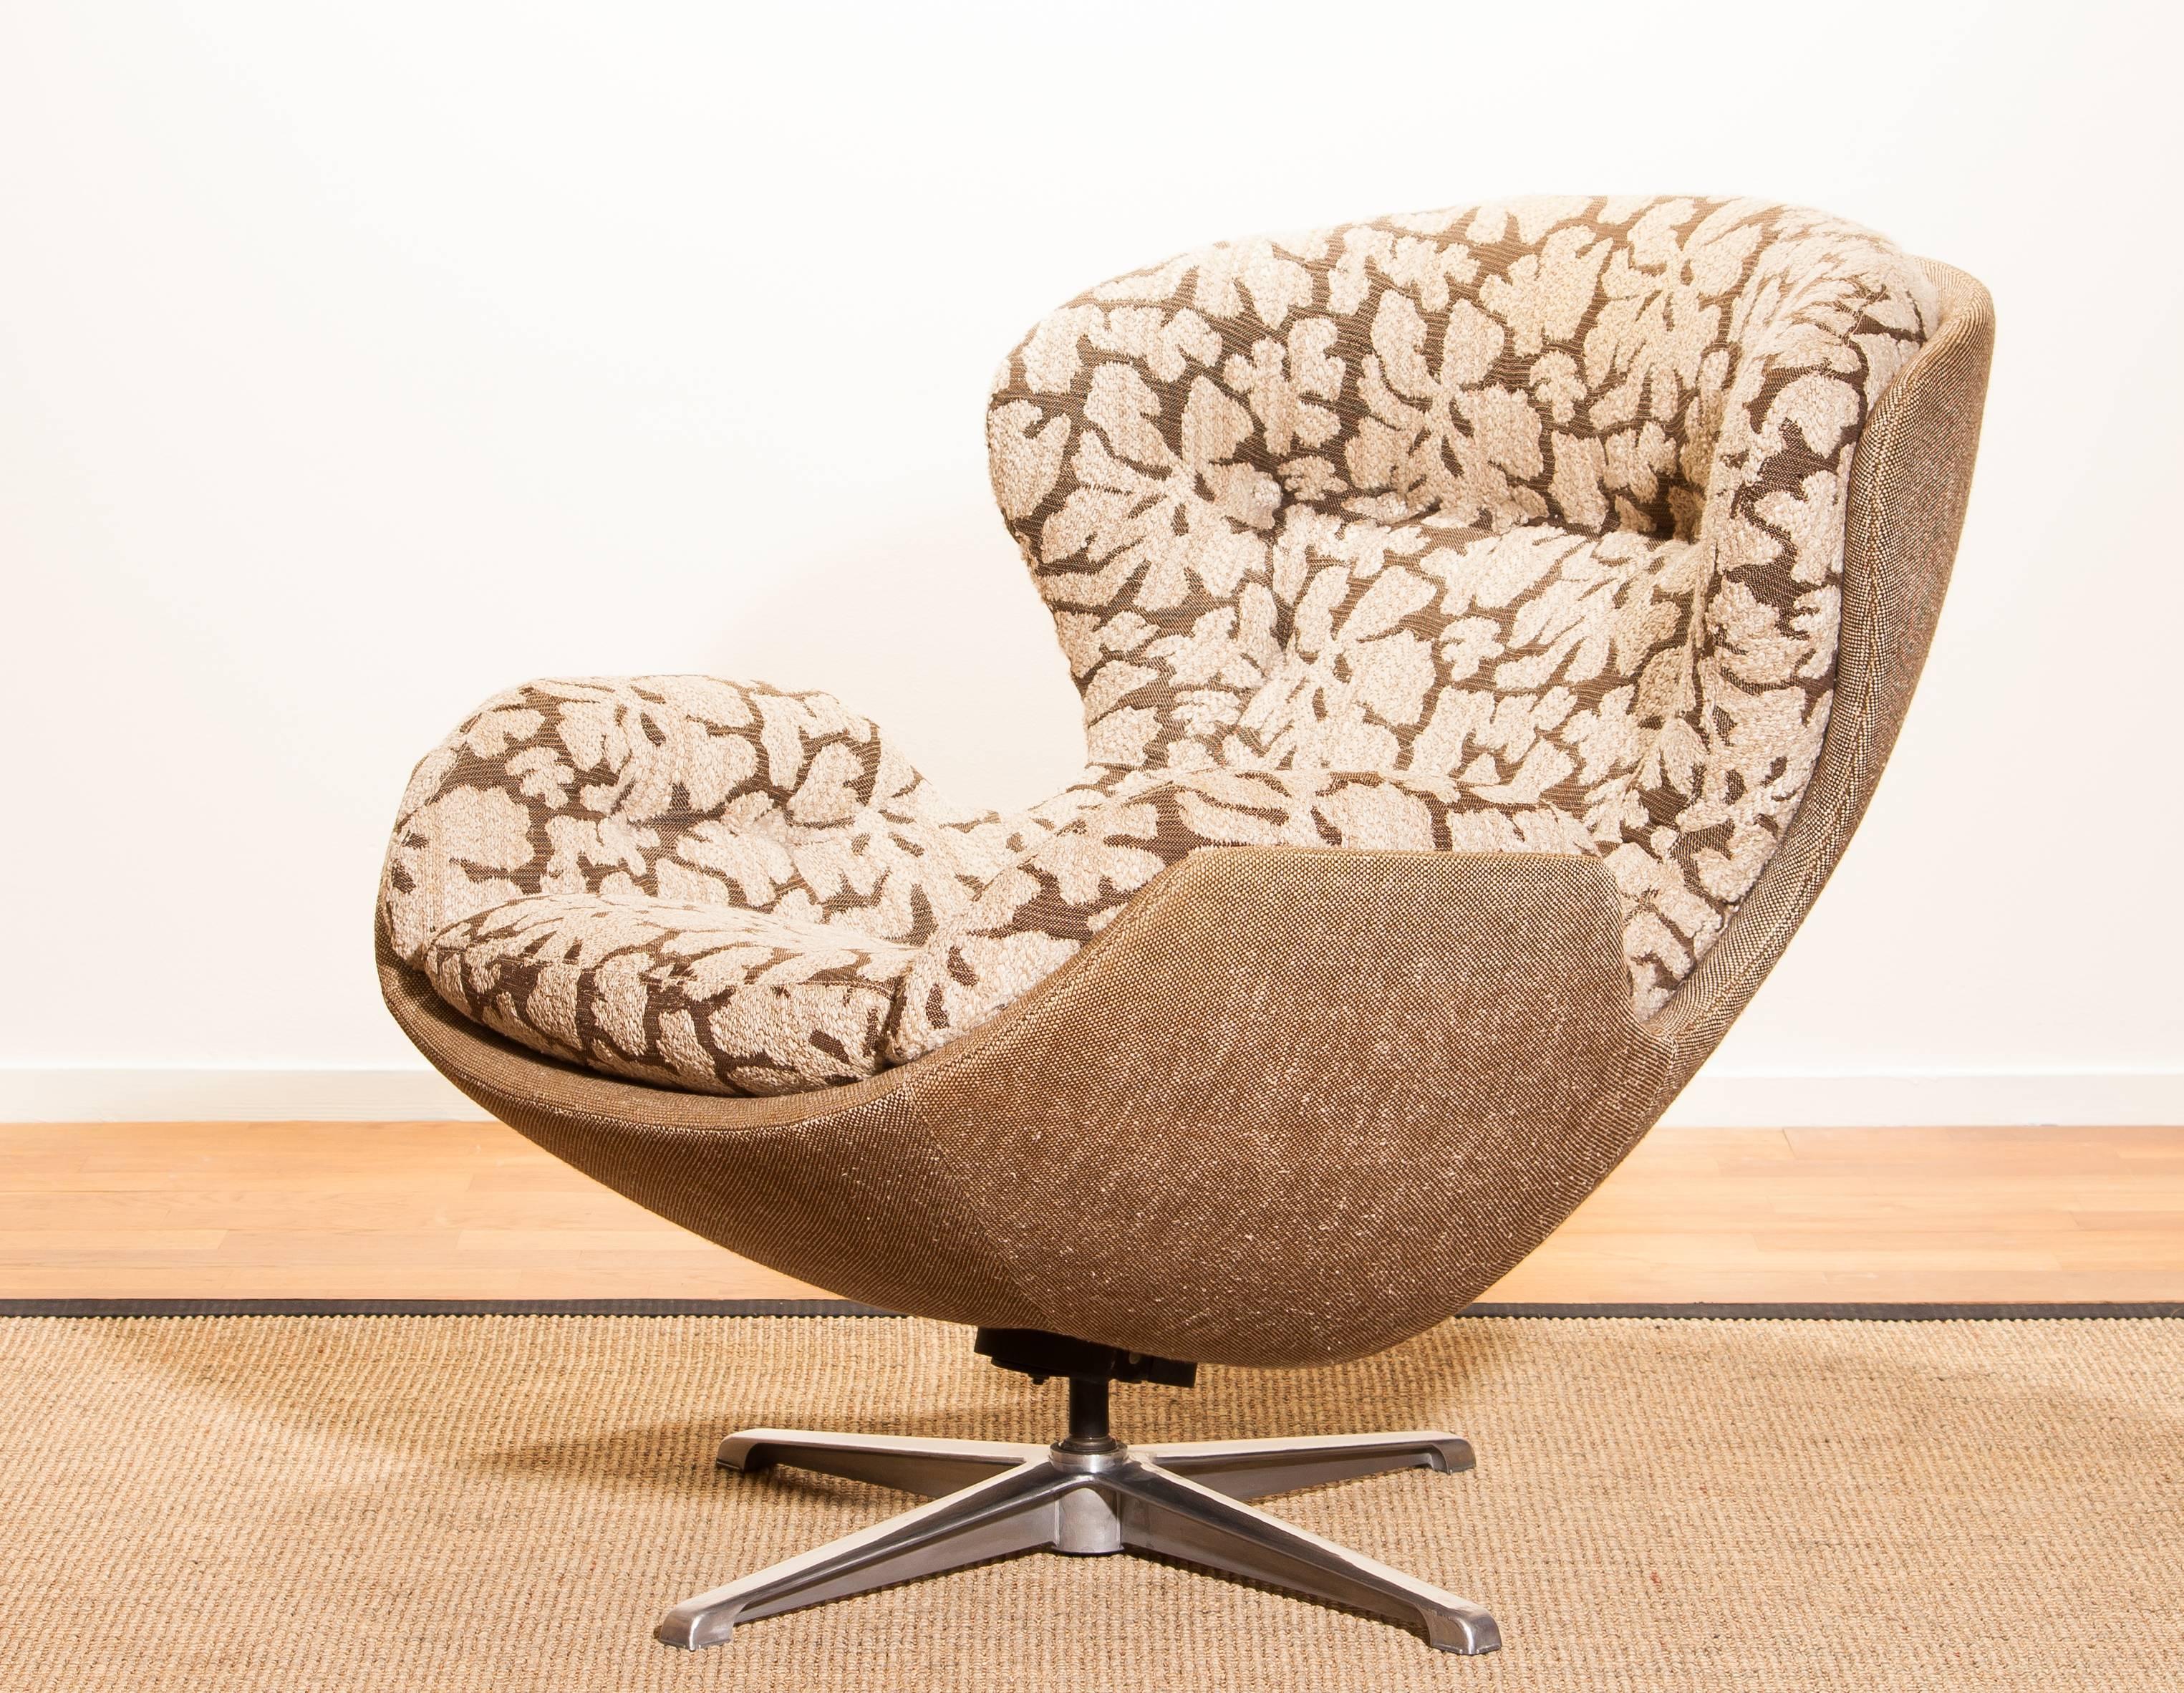 Beautiful swivel lounge chair designed by Lennart Bender for Ulferts Möbler, Sweden.
This comfortable chair is made of a steel swivel frame with an original fabric upholstered seating.
Period, 1970s
Dimensions H.90 cm, W.82 cm, D.95 cm.